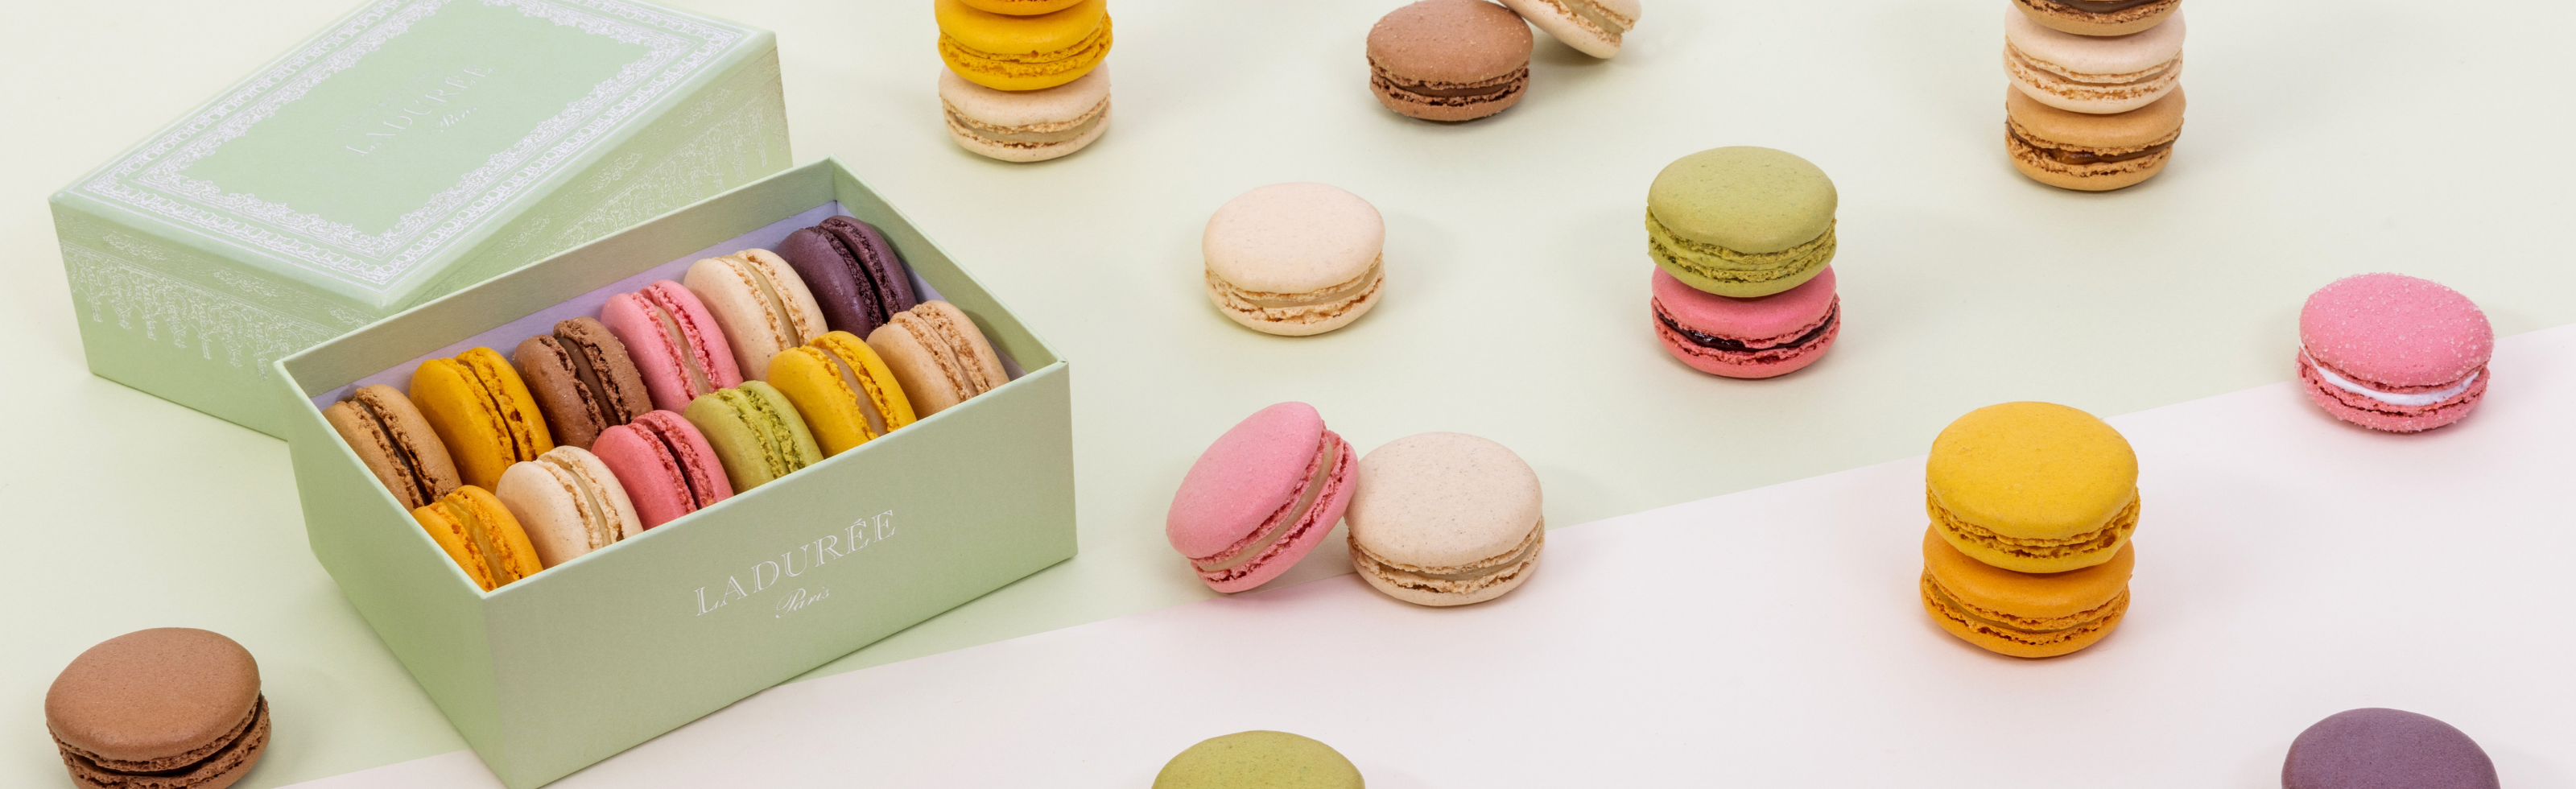 Compose your own macarons gift box